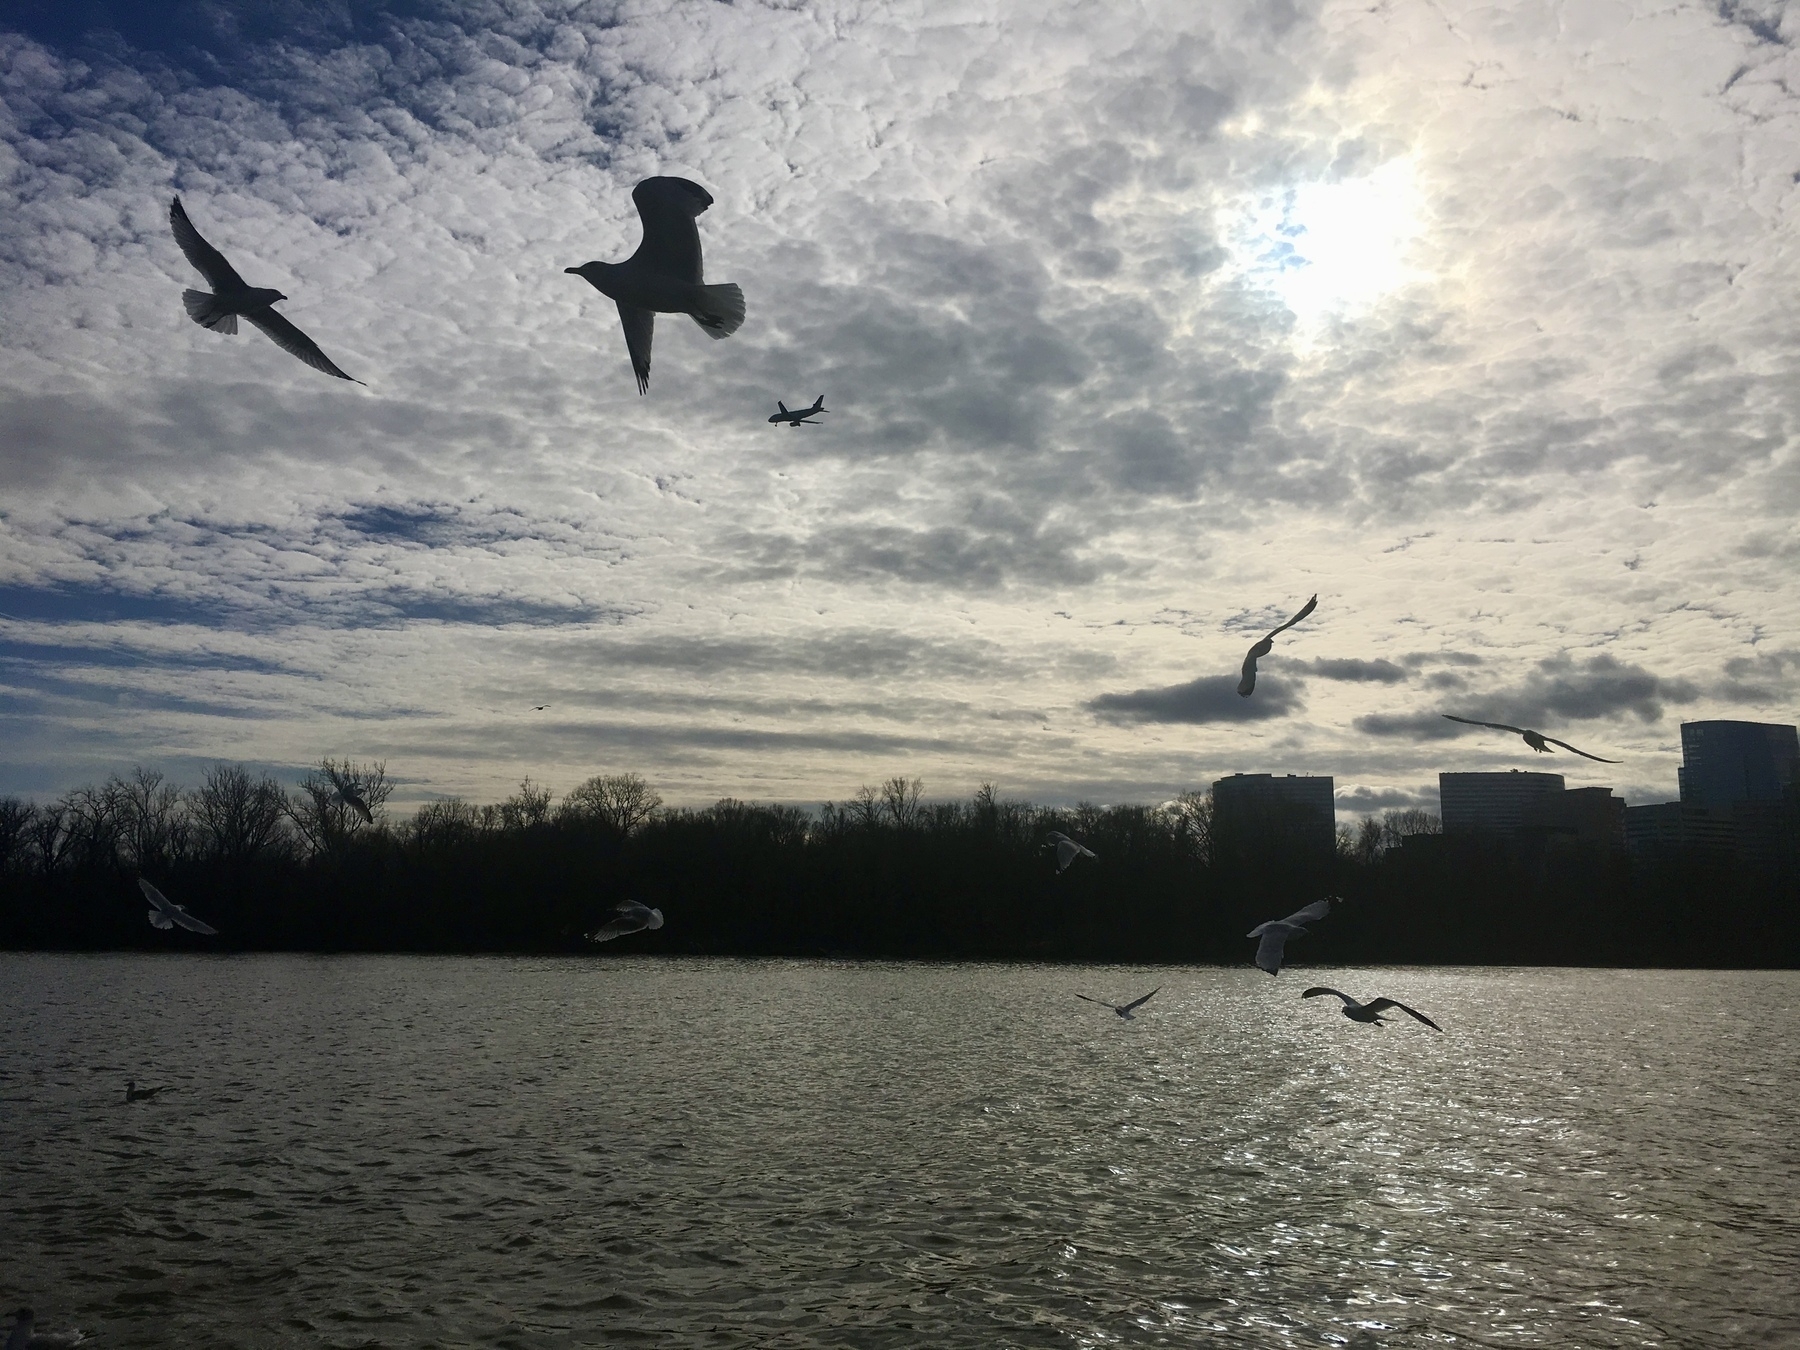 Photo of birds and an airplane flying above the Potomac, silhouetted against a cloudy sky.